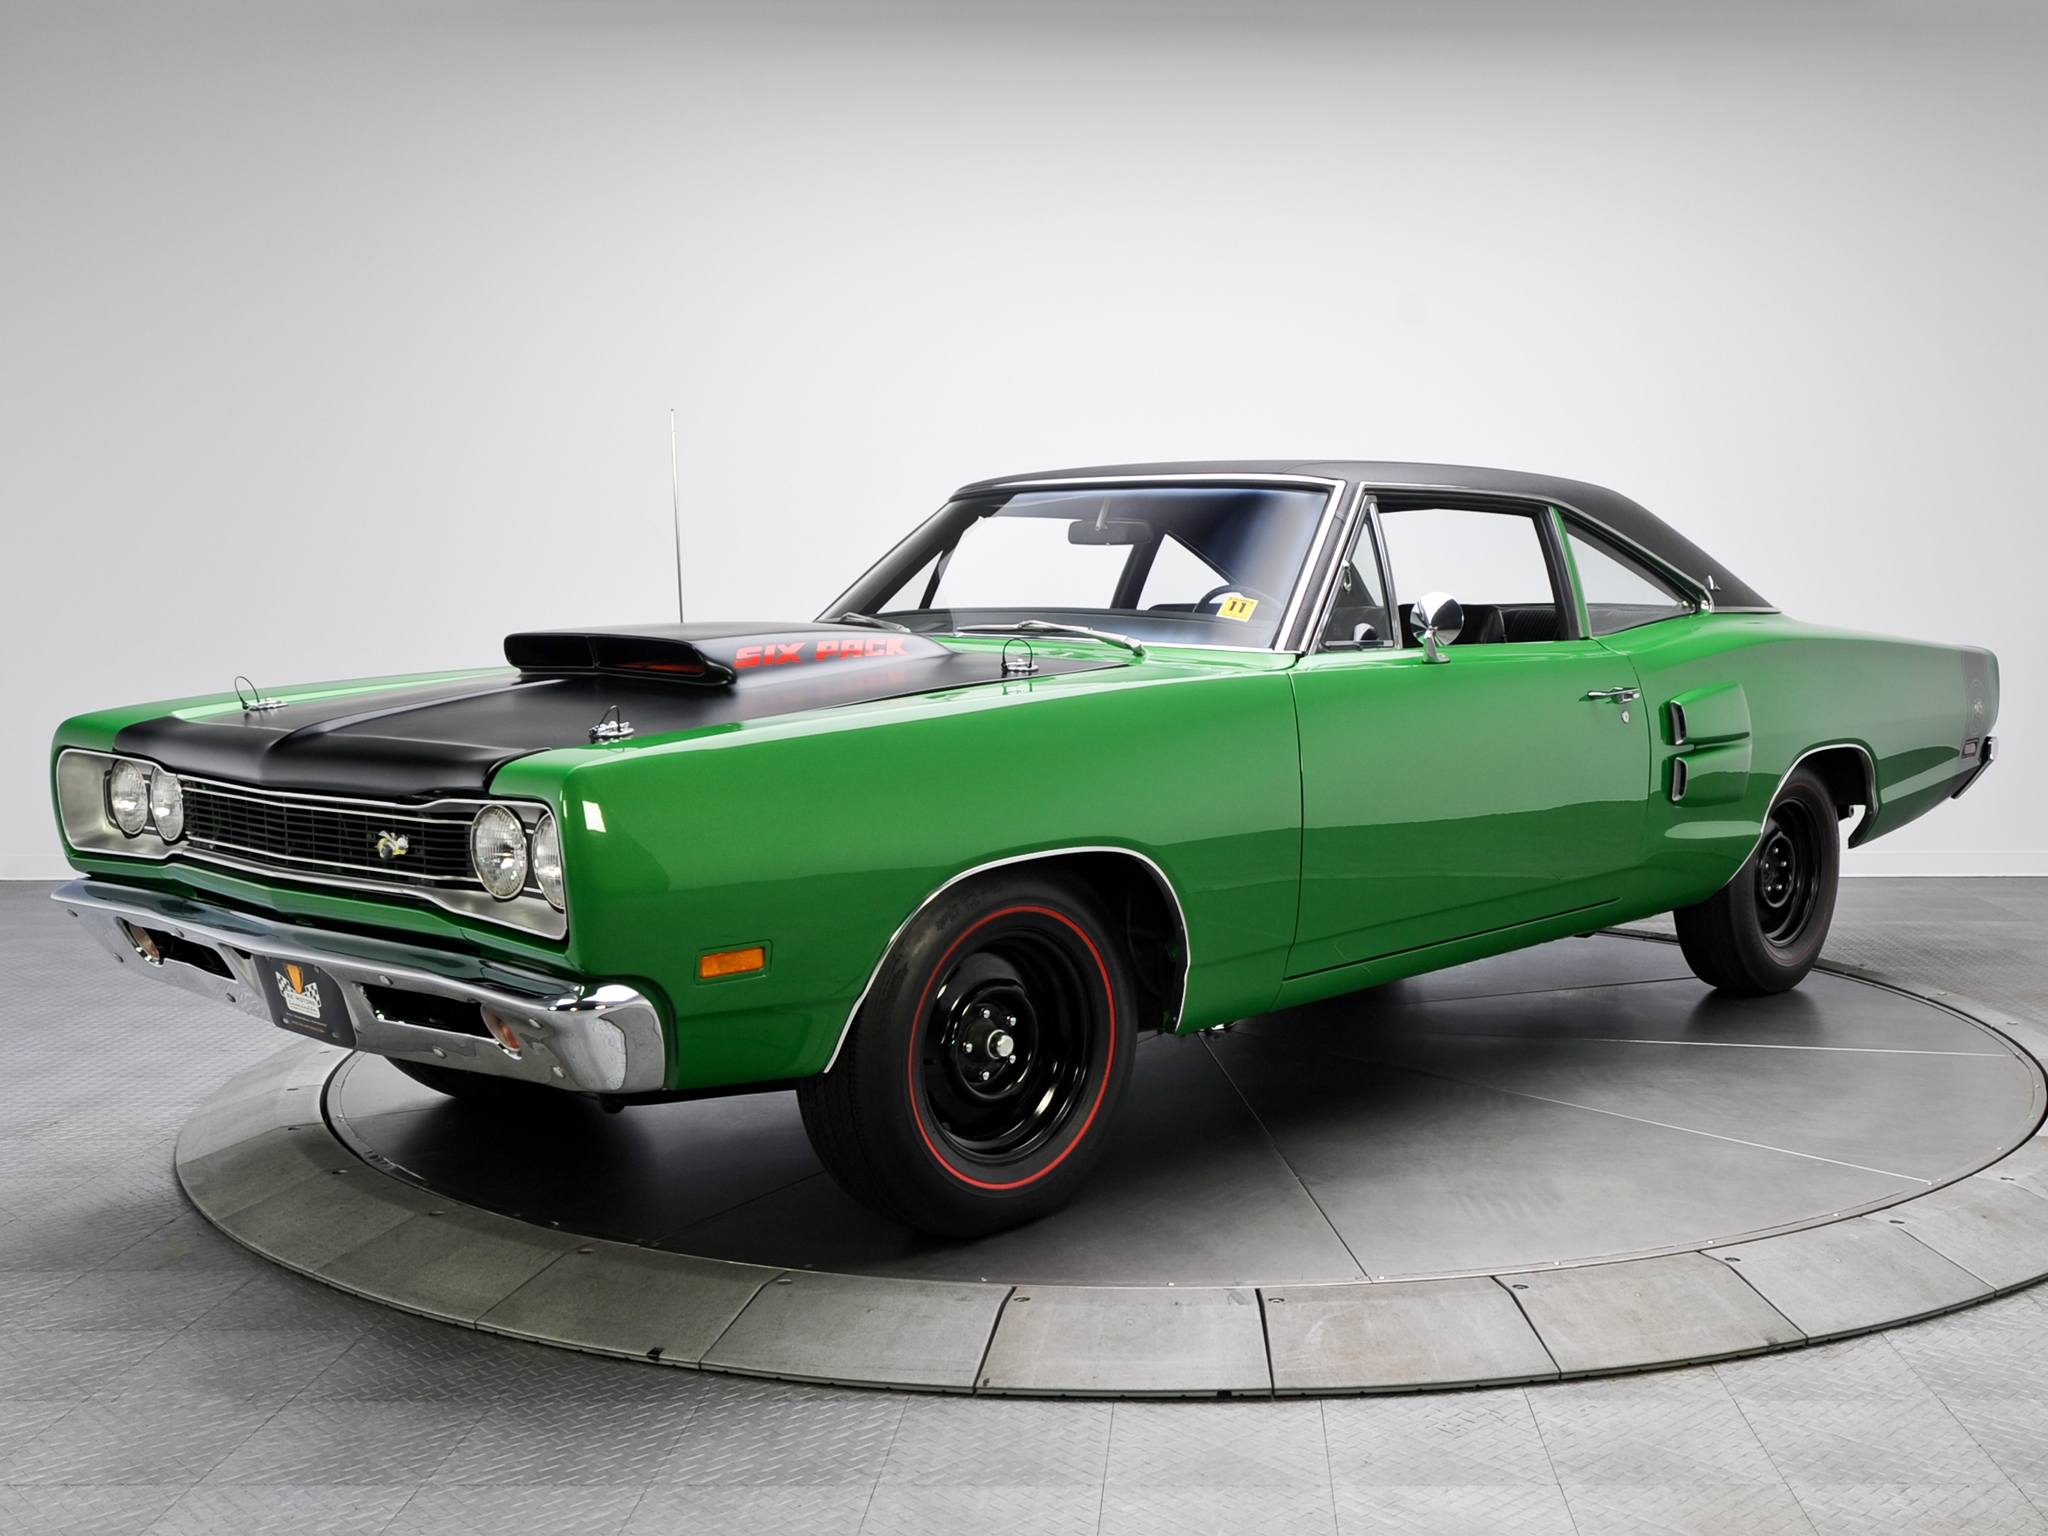 1969, Dodge, Coronet, Super, Bee, 440, Six, Pack, Coupe, Wm21, Muscle, Classic Wallpaper